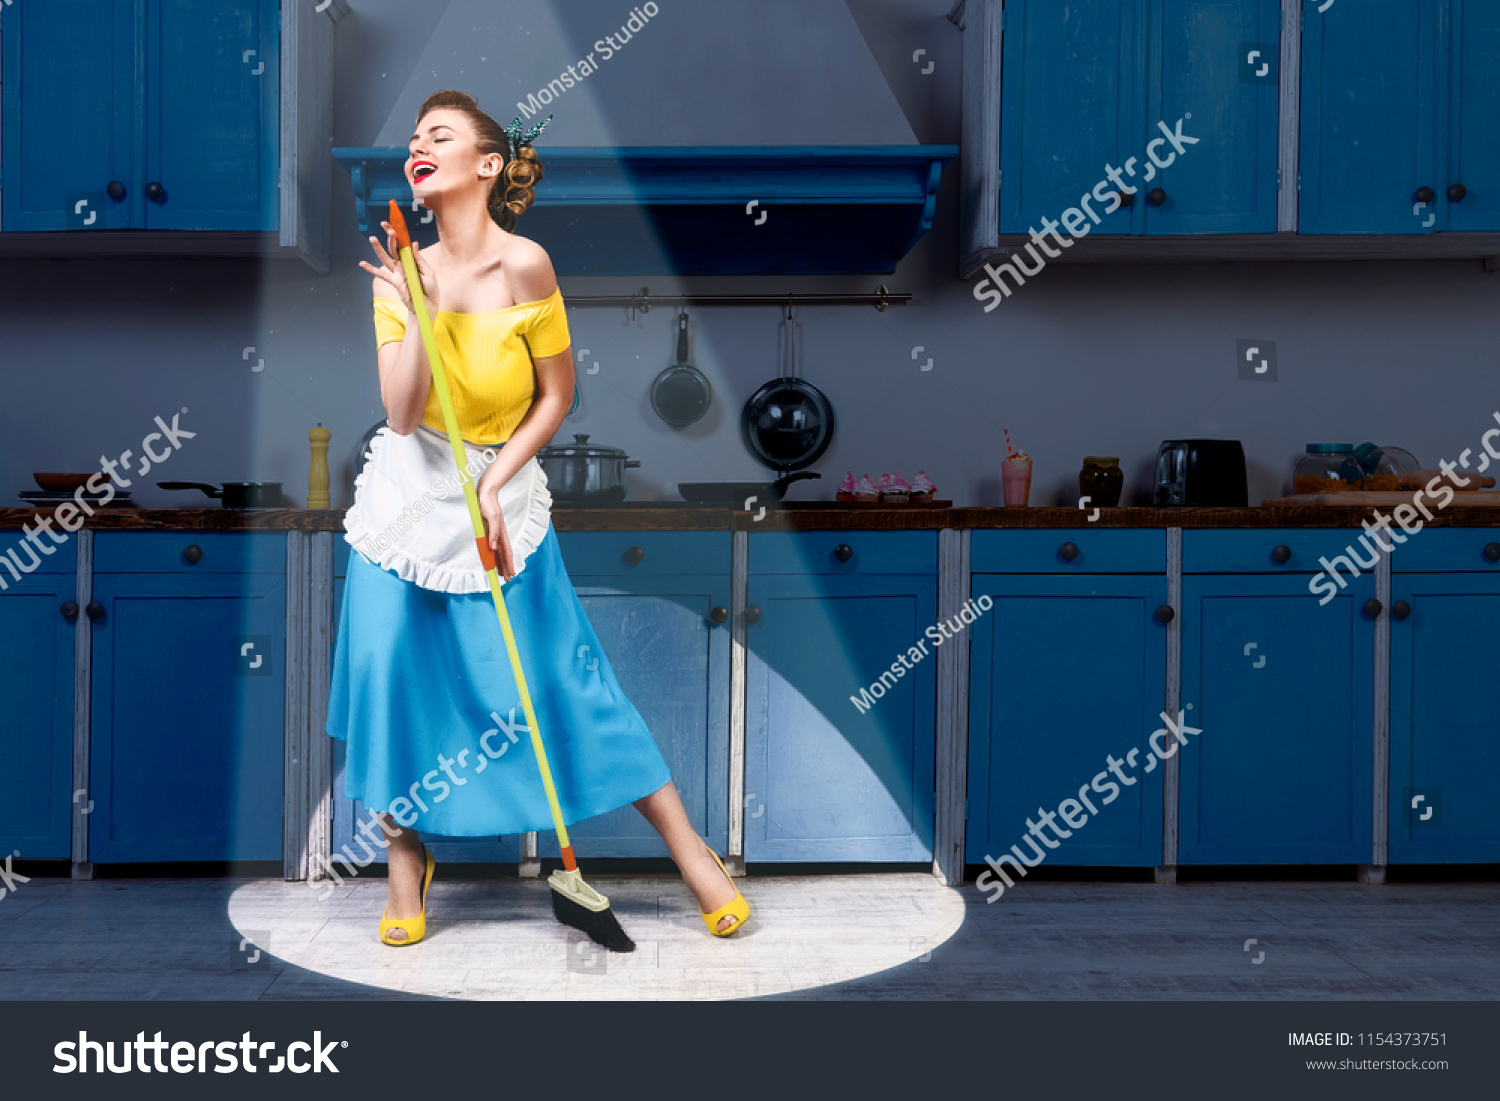 Retro pin up girl woman female housewife wearing yellow top, blue skirt and white apron holding mop singing and cleaning floor in stage light kitchen with blue cabinets and utensils. Housework concept #1154373751